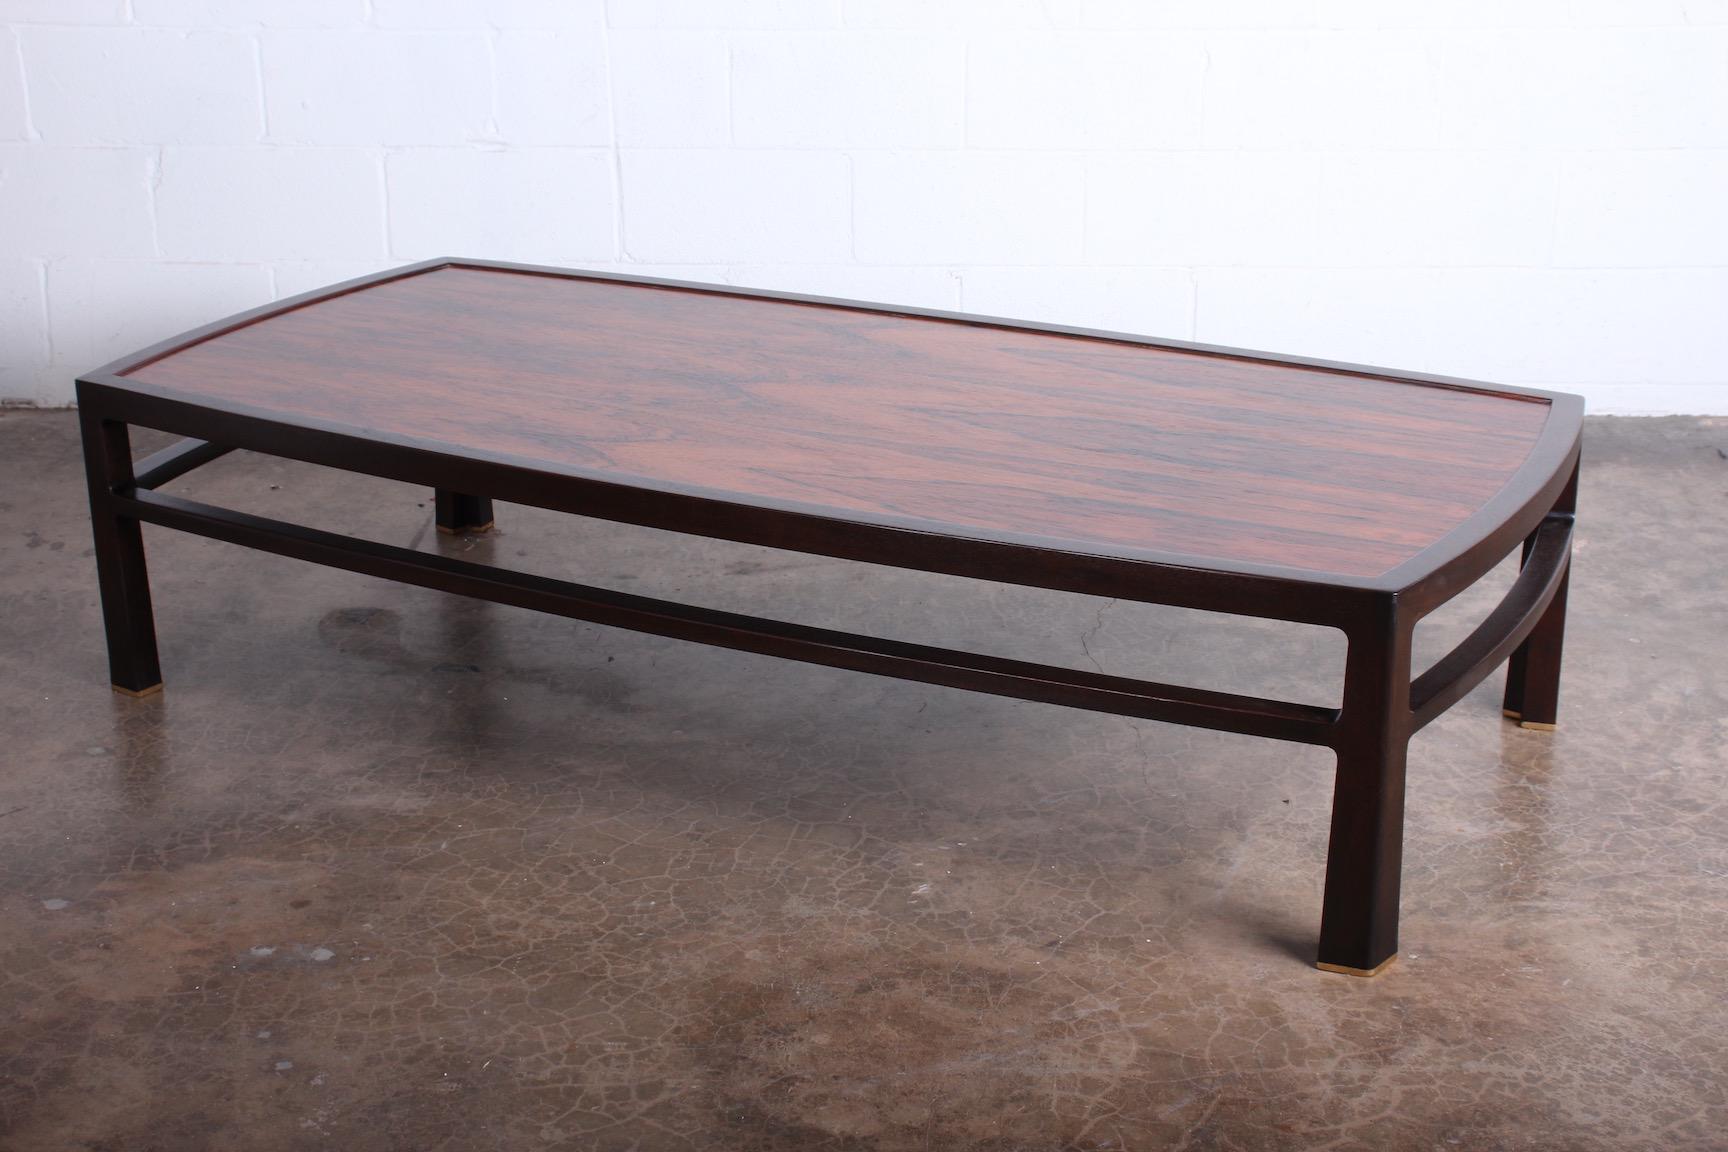 A large scale mahogany and rosewood coffee table designed by Edward Wormley for Dunbar.